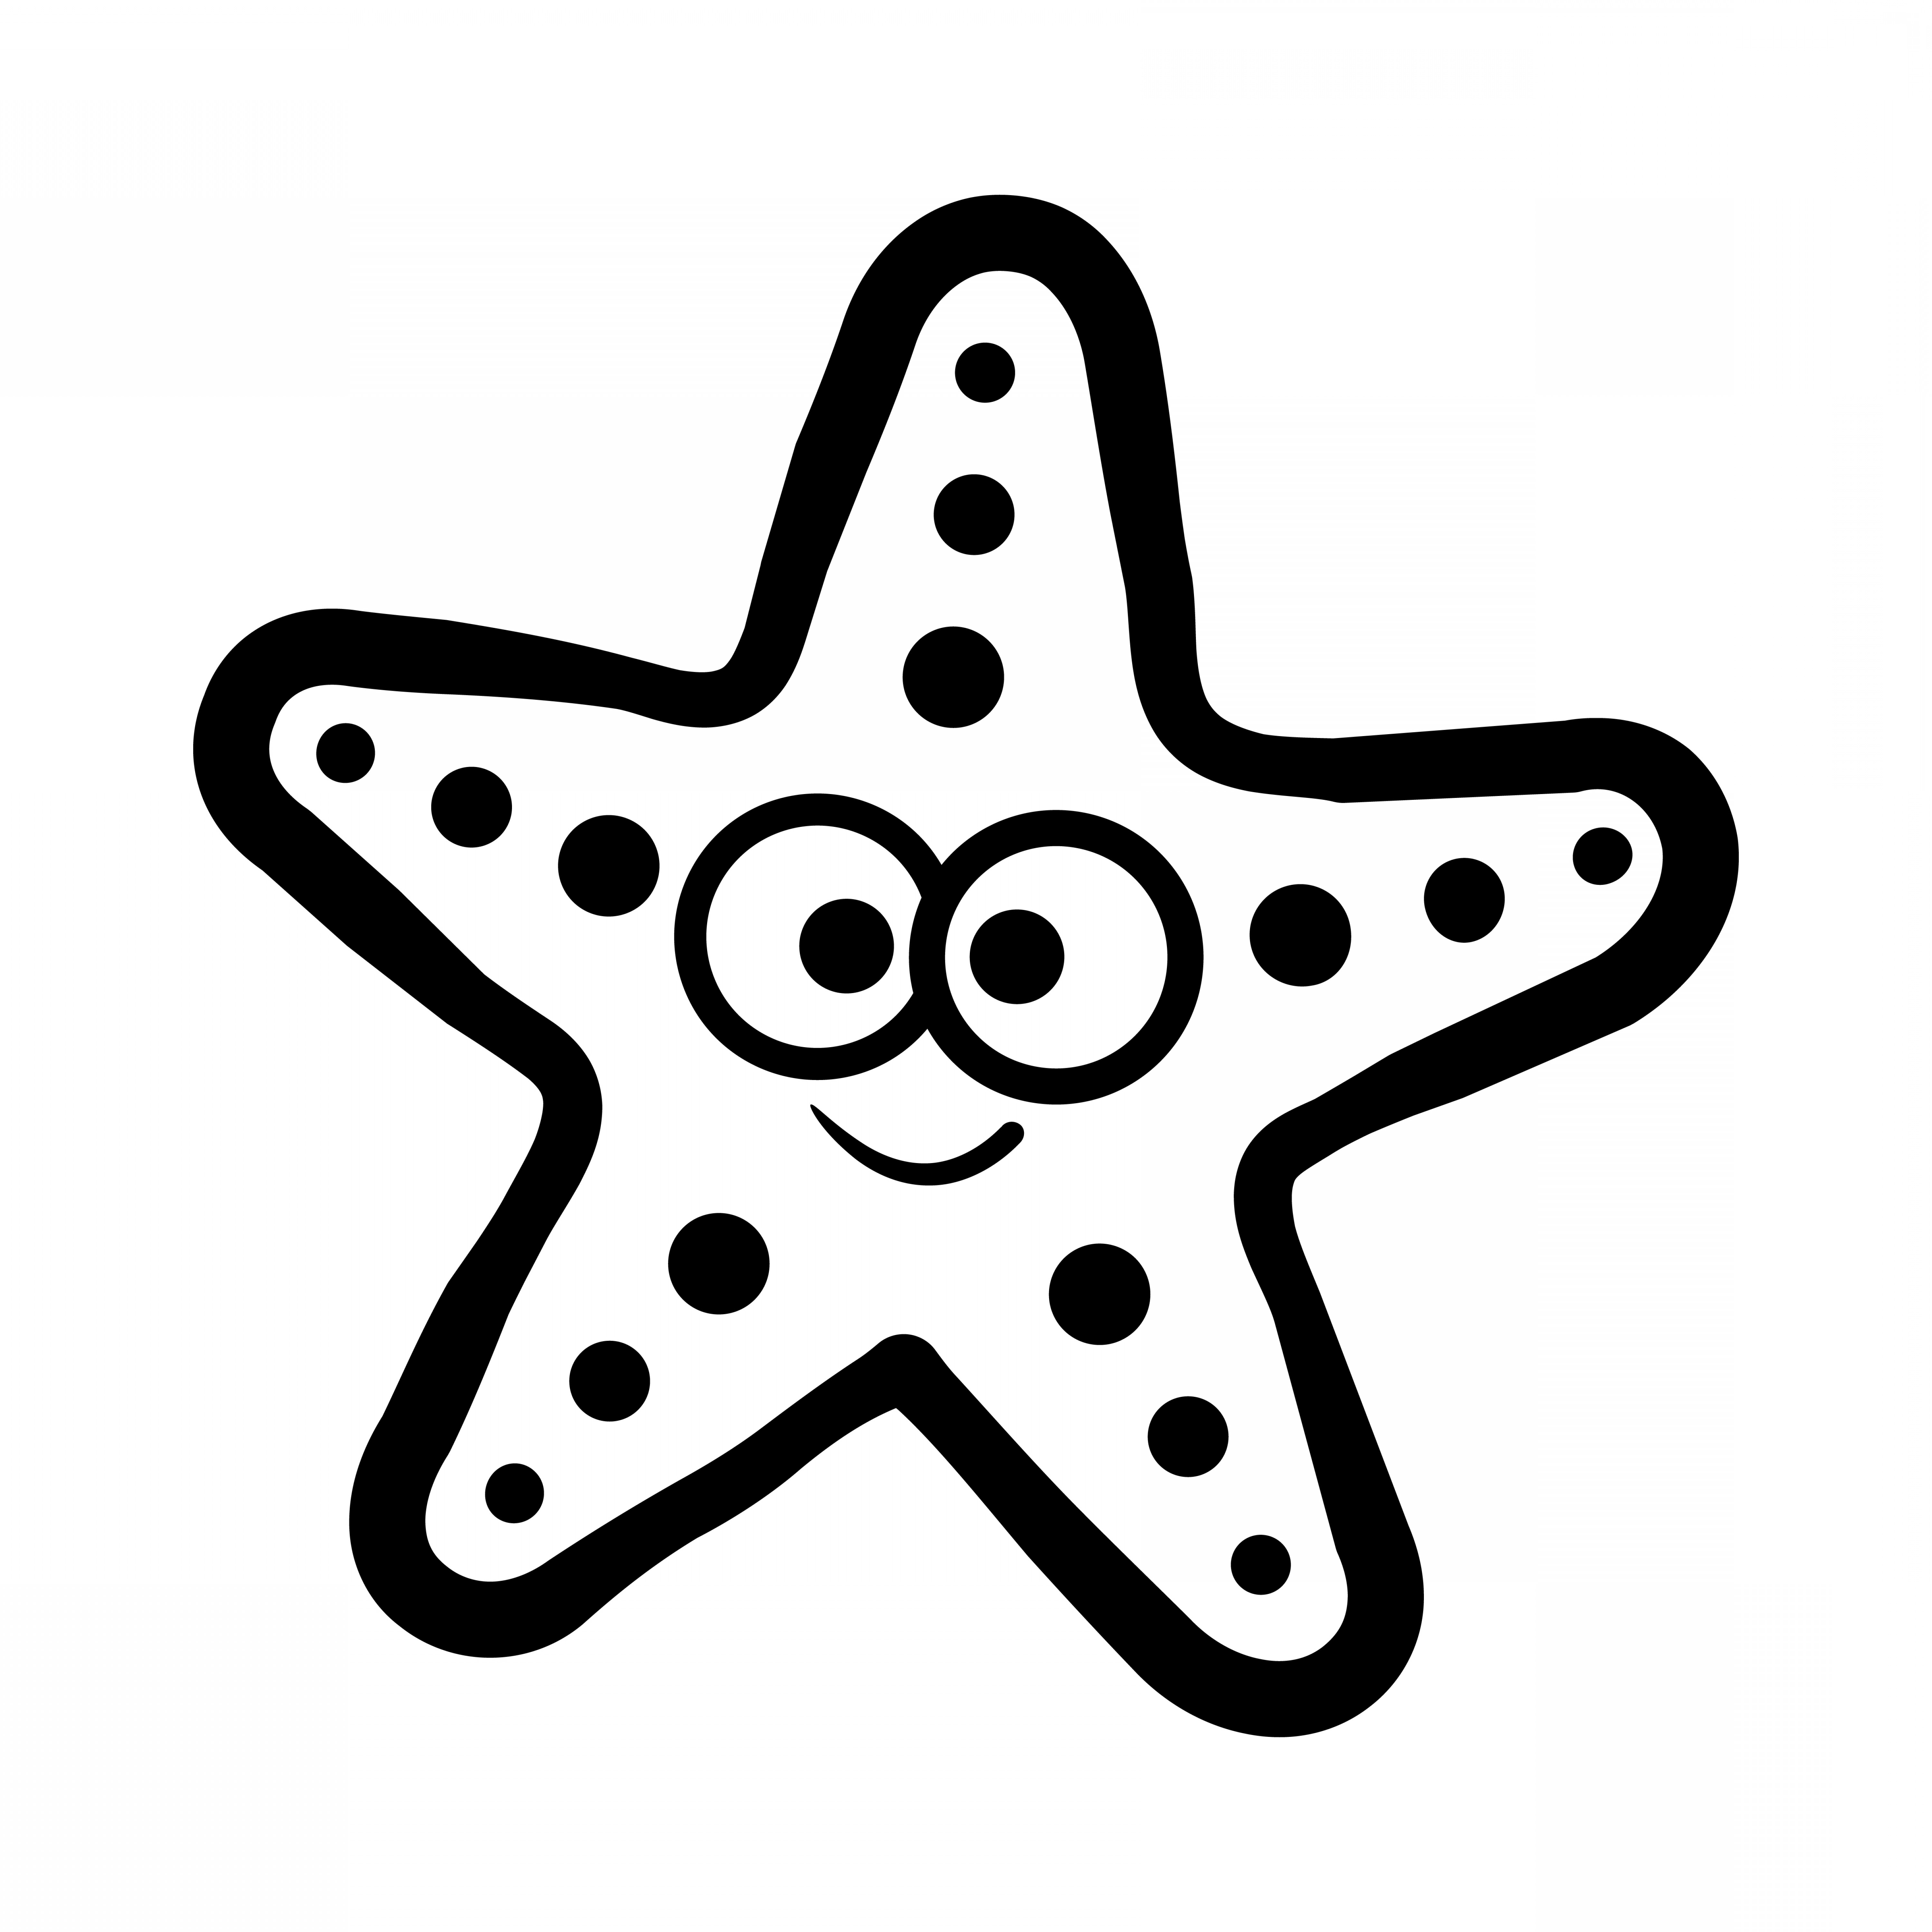 Download Starfish Vector Art at Vectorified.com | Collection of ...